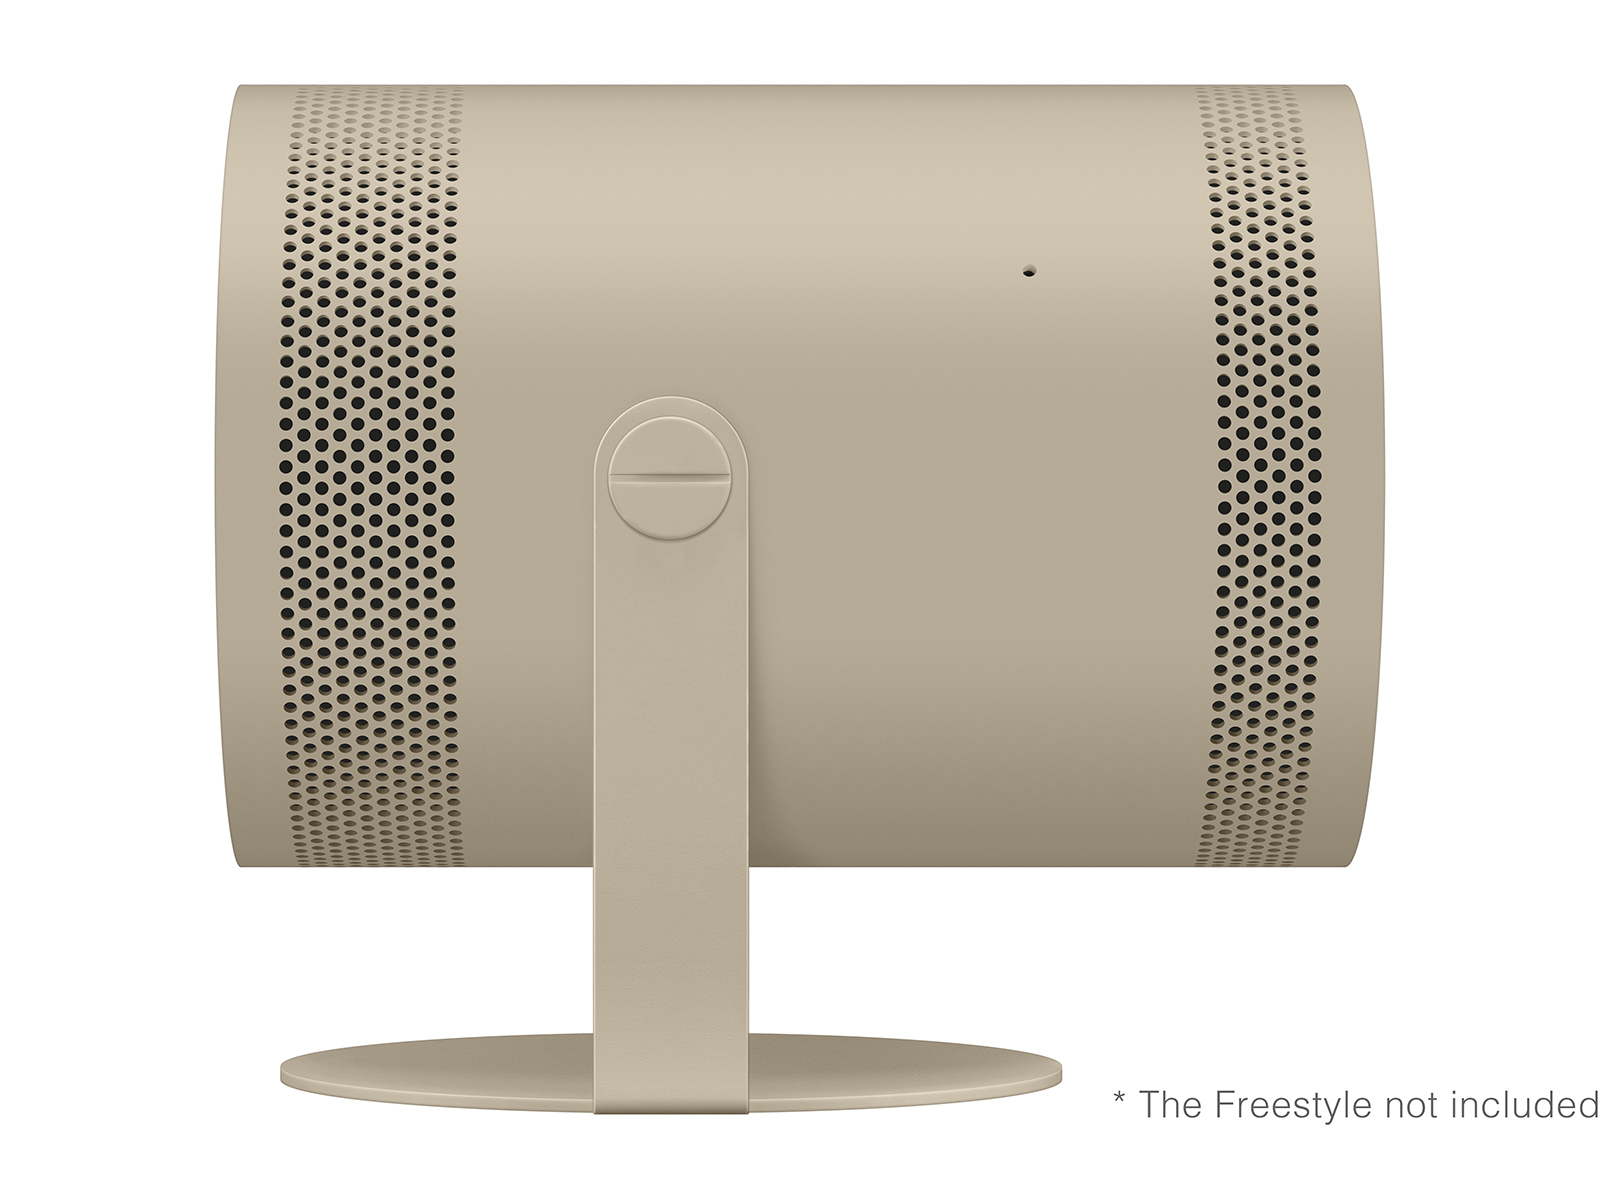 Thumbnail image of The Freestyle Skin and Cradle: Coyote Beige